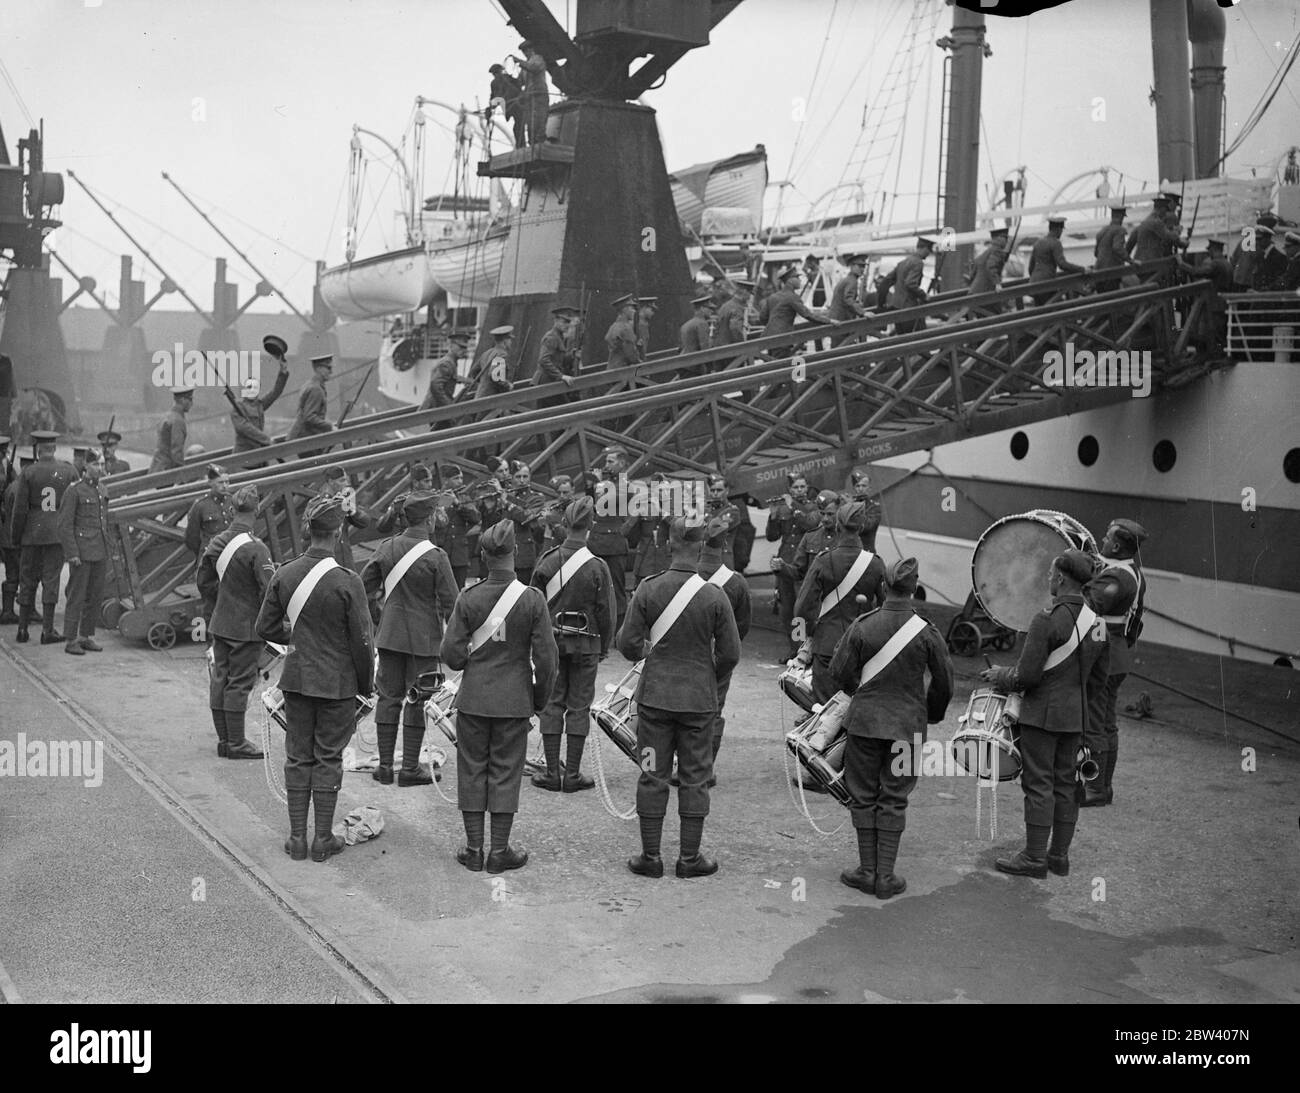 Thousand troops , including reservists , leave for Palestine . Brought to Southampton in four special trains over thousand officers and men of the 2nd battle Wiltshire Regiment , and the 2nd battlelion Kings Royal Rifles embarked troopship Neuralia for Palestine . Nearly 600 reservists were included in the detachment . Photo shows , the band of the Wiltshire's playing the King's Royal Rifles detachment aboard Neuralie at Southampton . 18 September 1936 Stock Photo